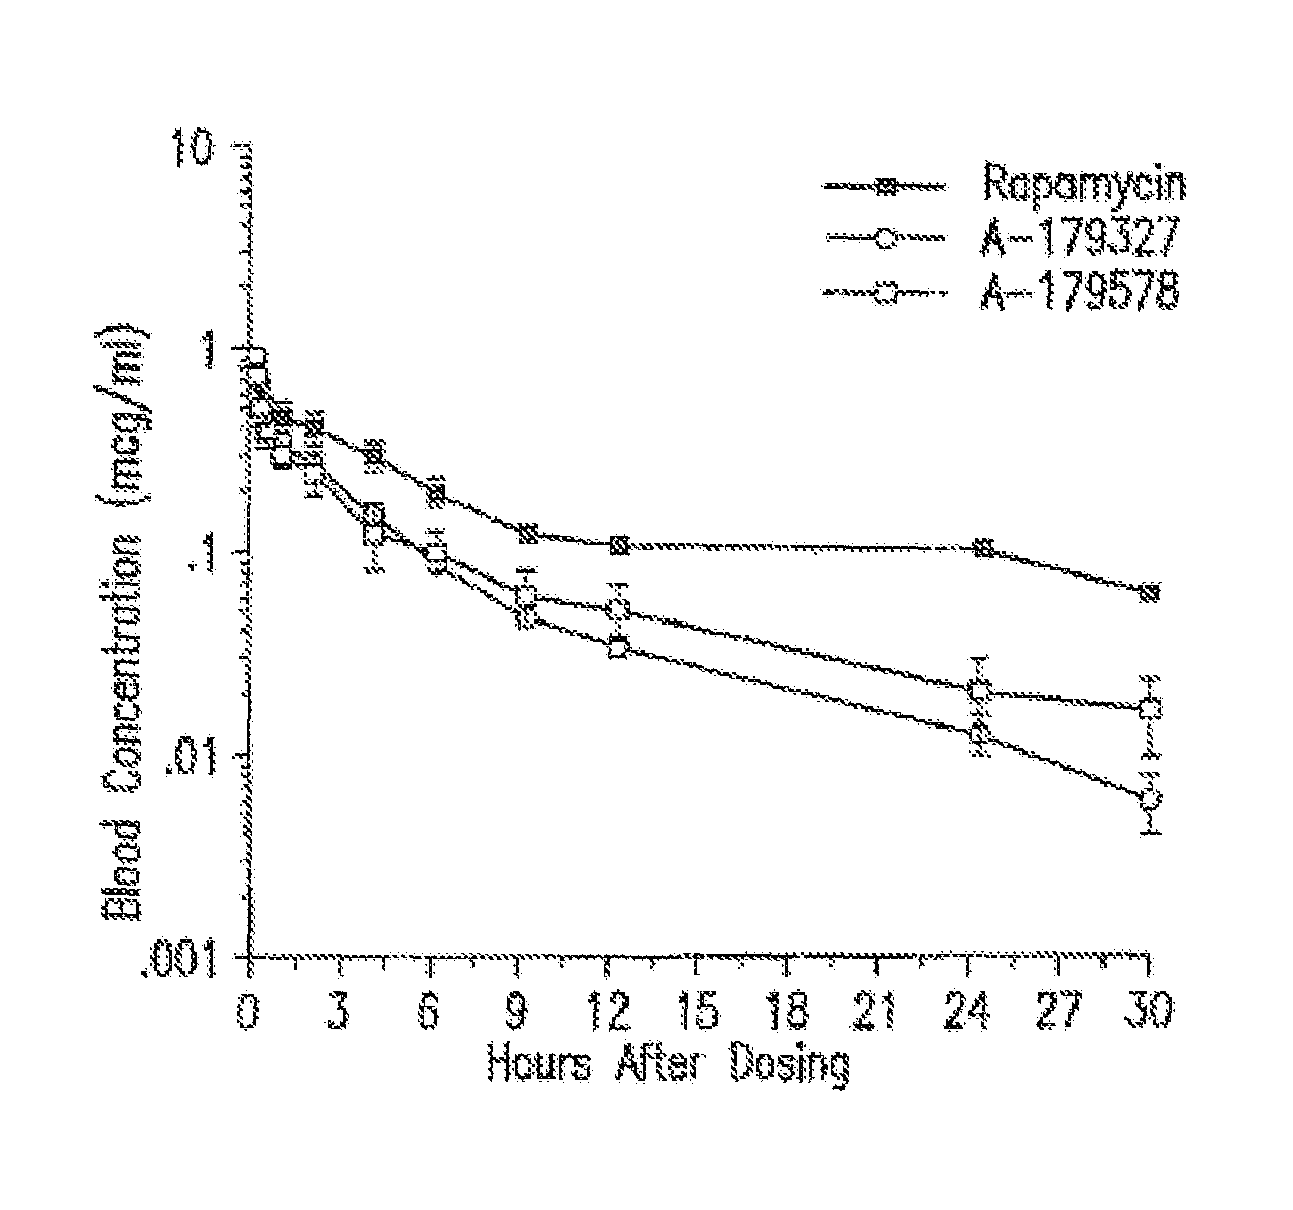 Methods of administering rapamycin analogs with anti-inflammatories using medical devices